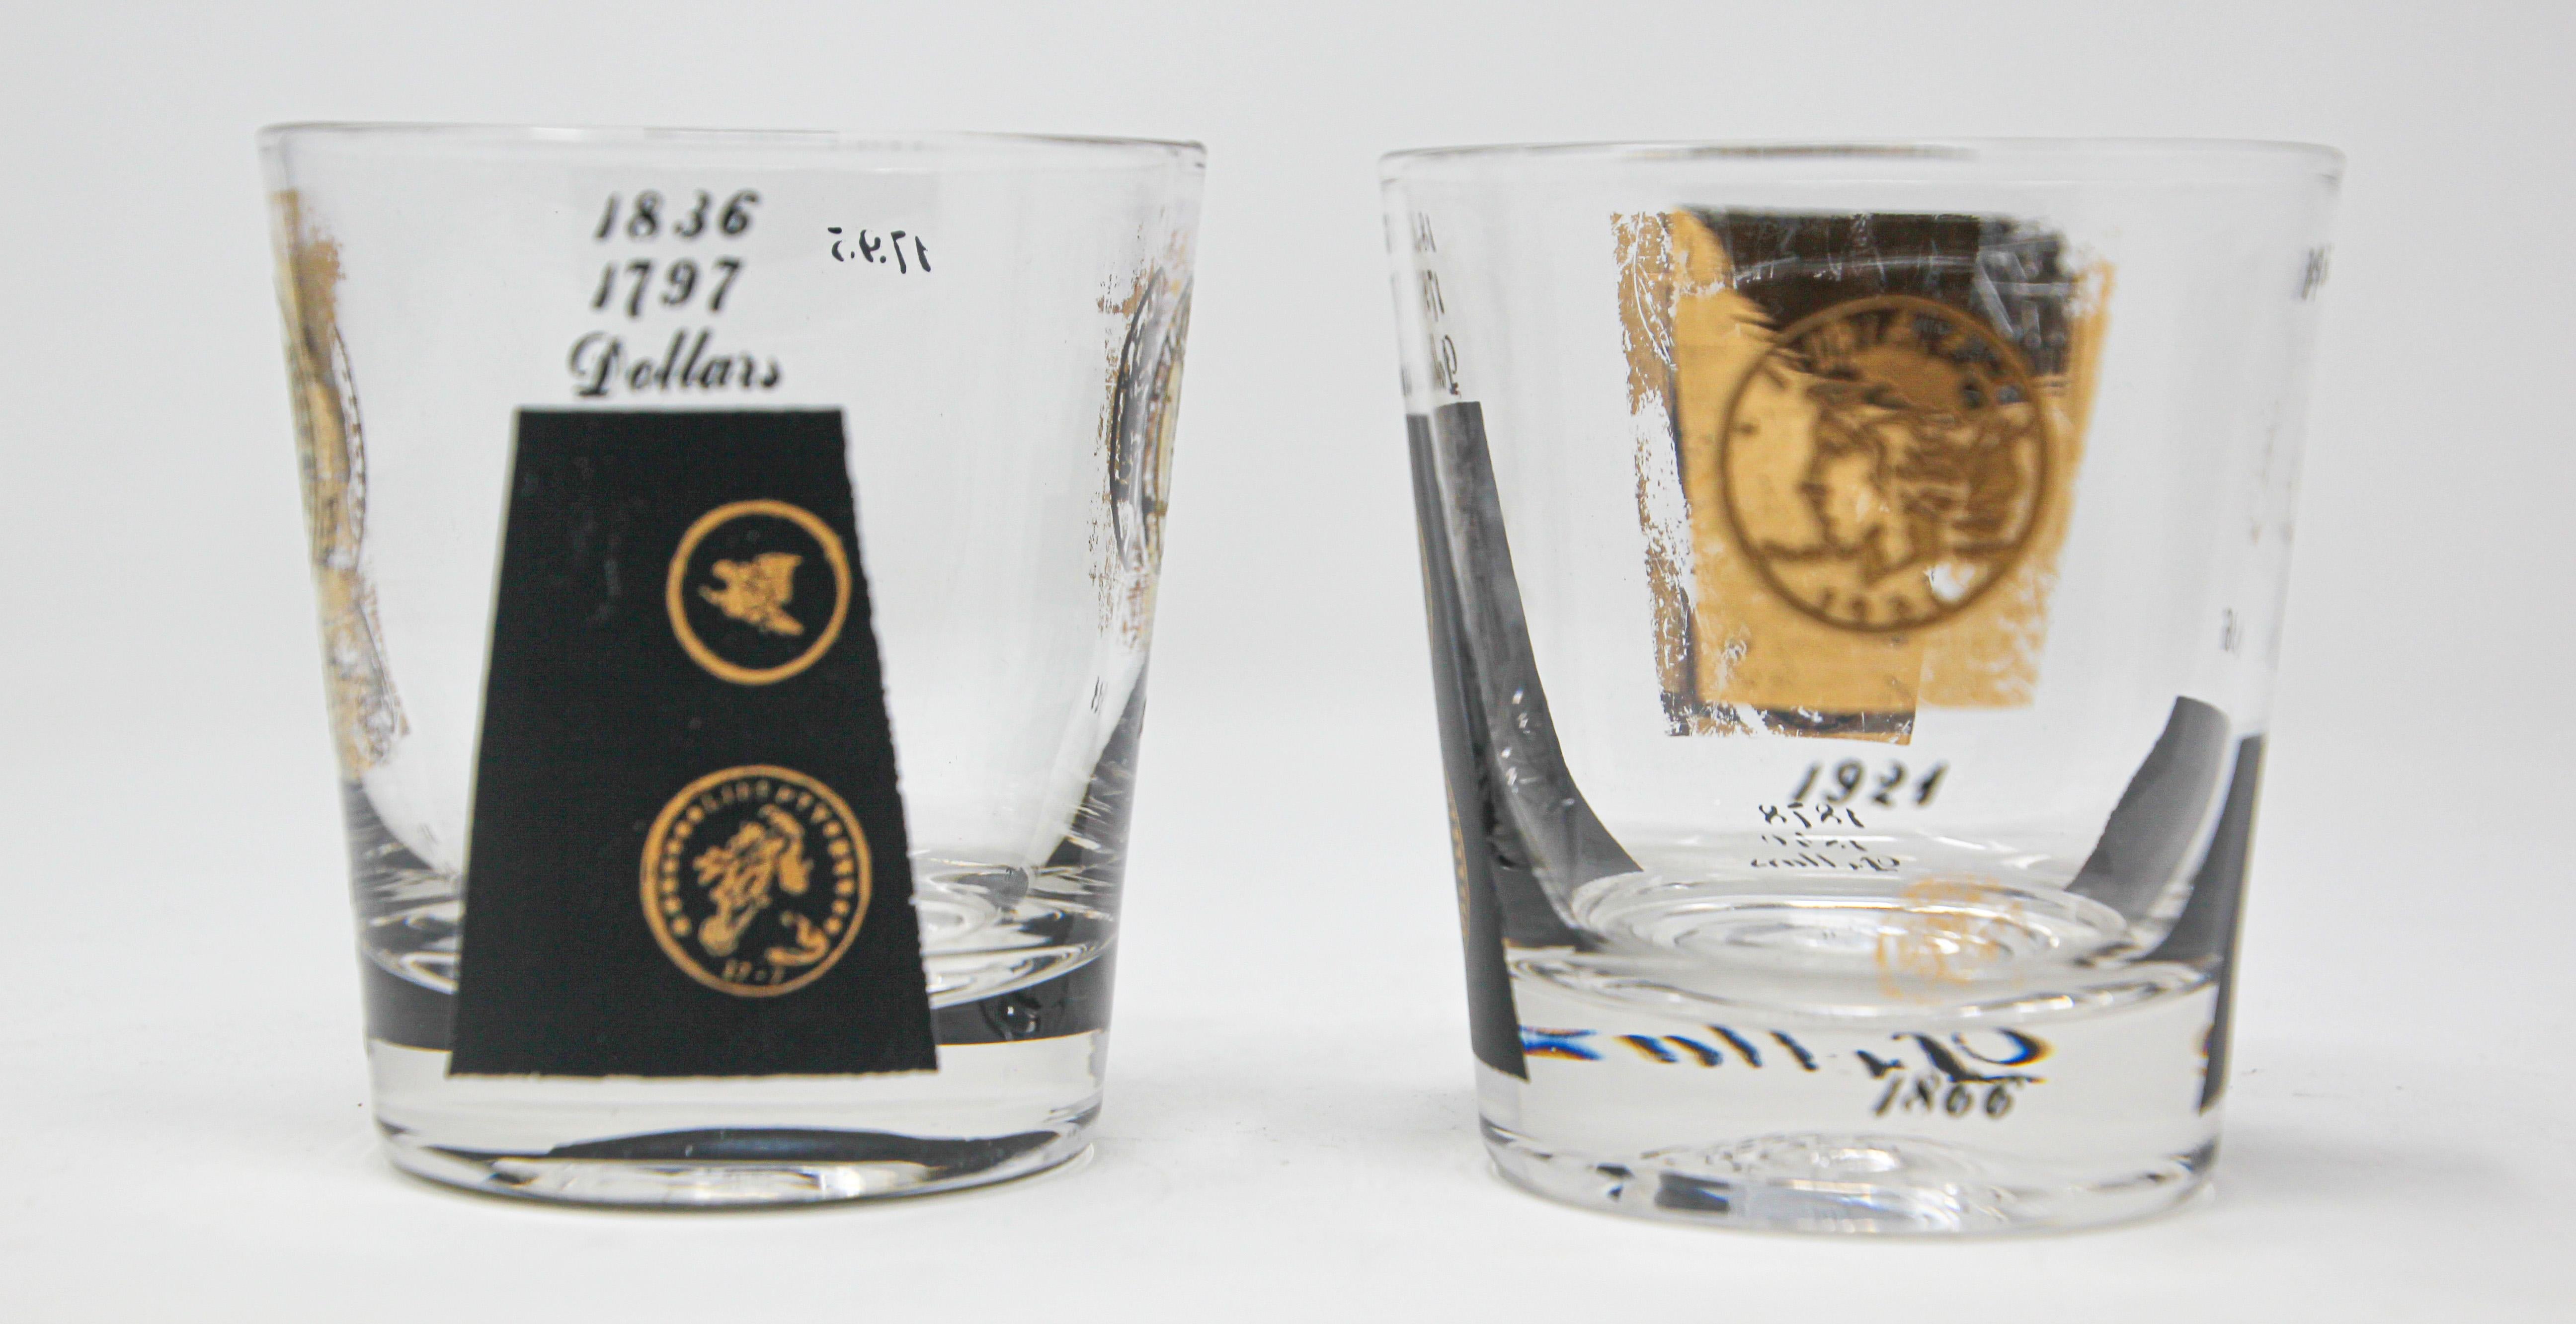 Midcentury vintage set of 2 pieces rocks glasses 1960s gold printed presidential coins.
Cera 22-karat gold signed glassware barware.
Gold and black coin design.
The glasses feature 